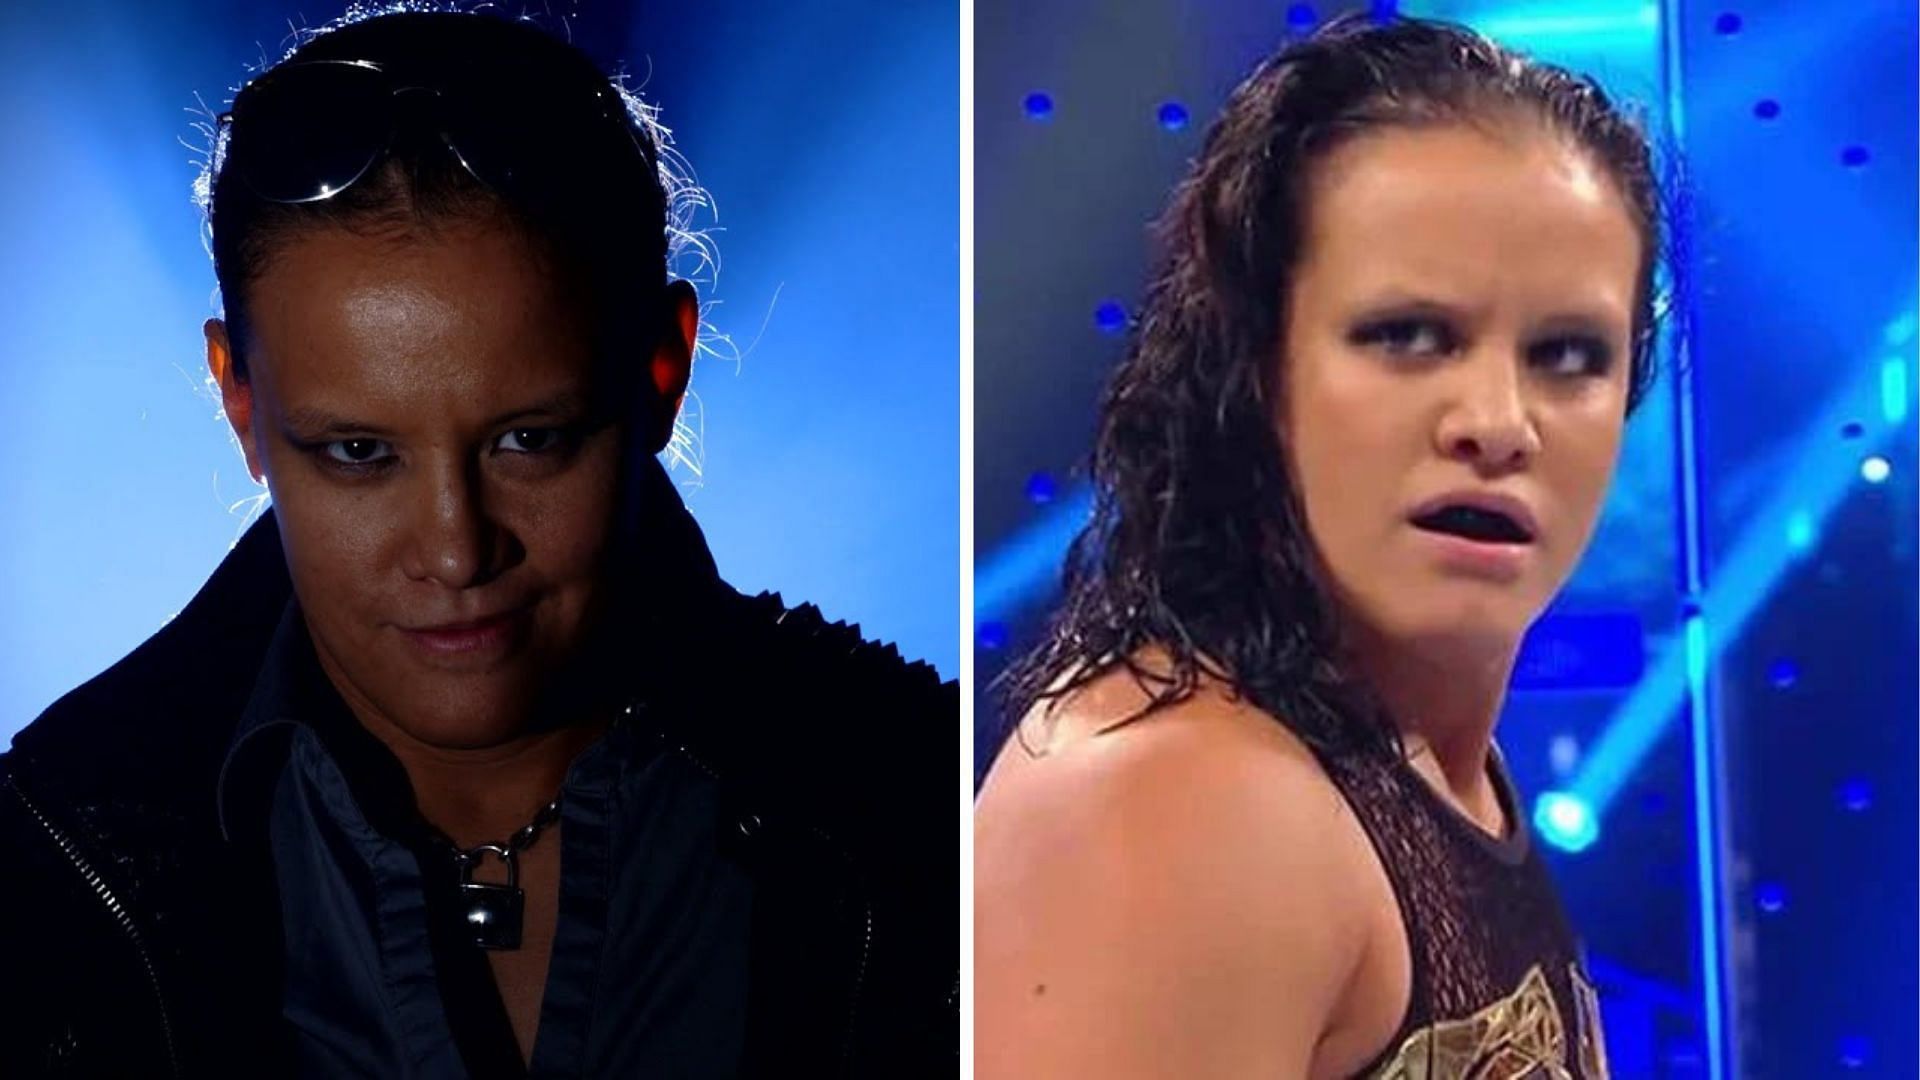 Shayna Baszler recently aligned with SmackDown Women